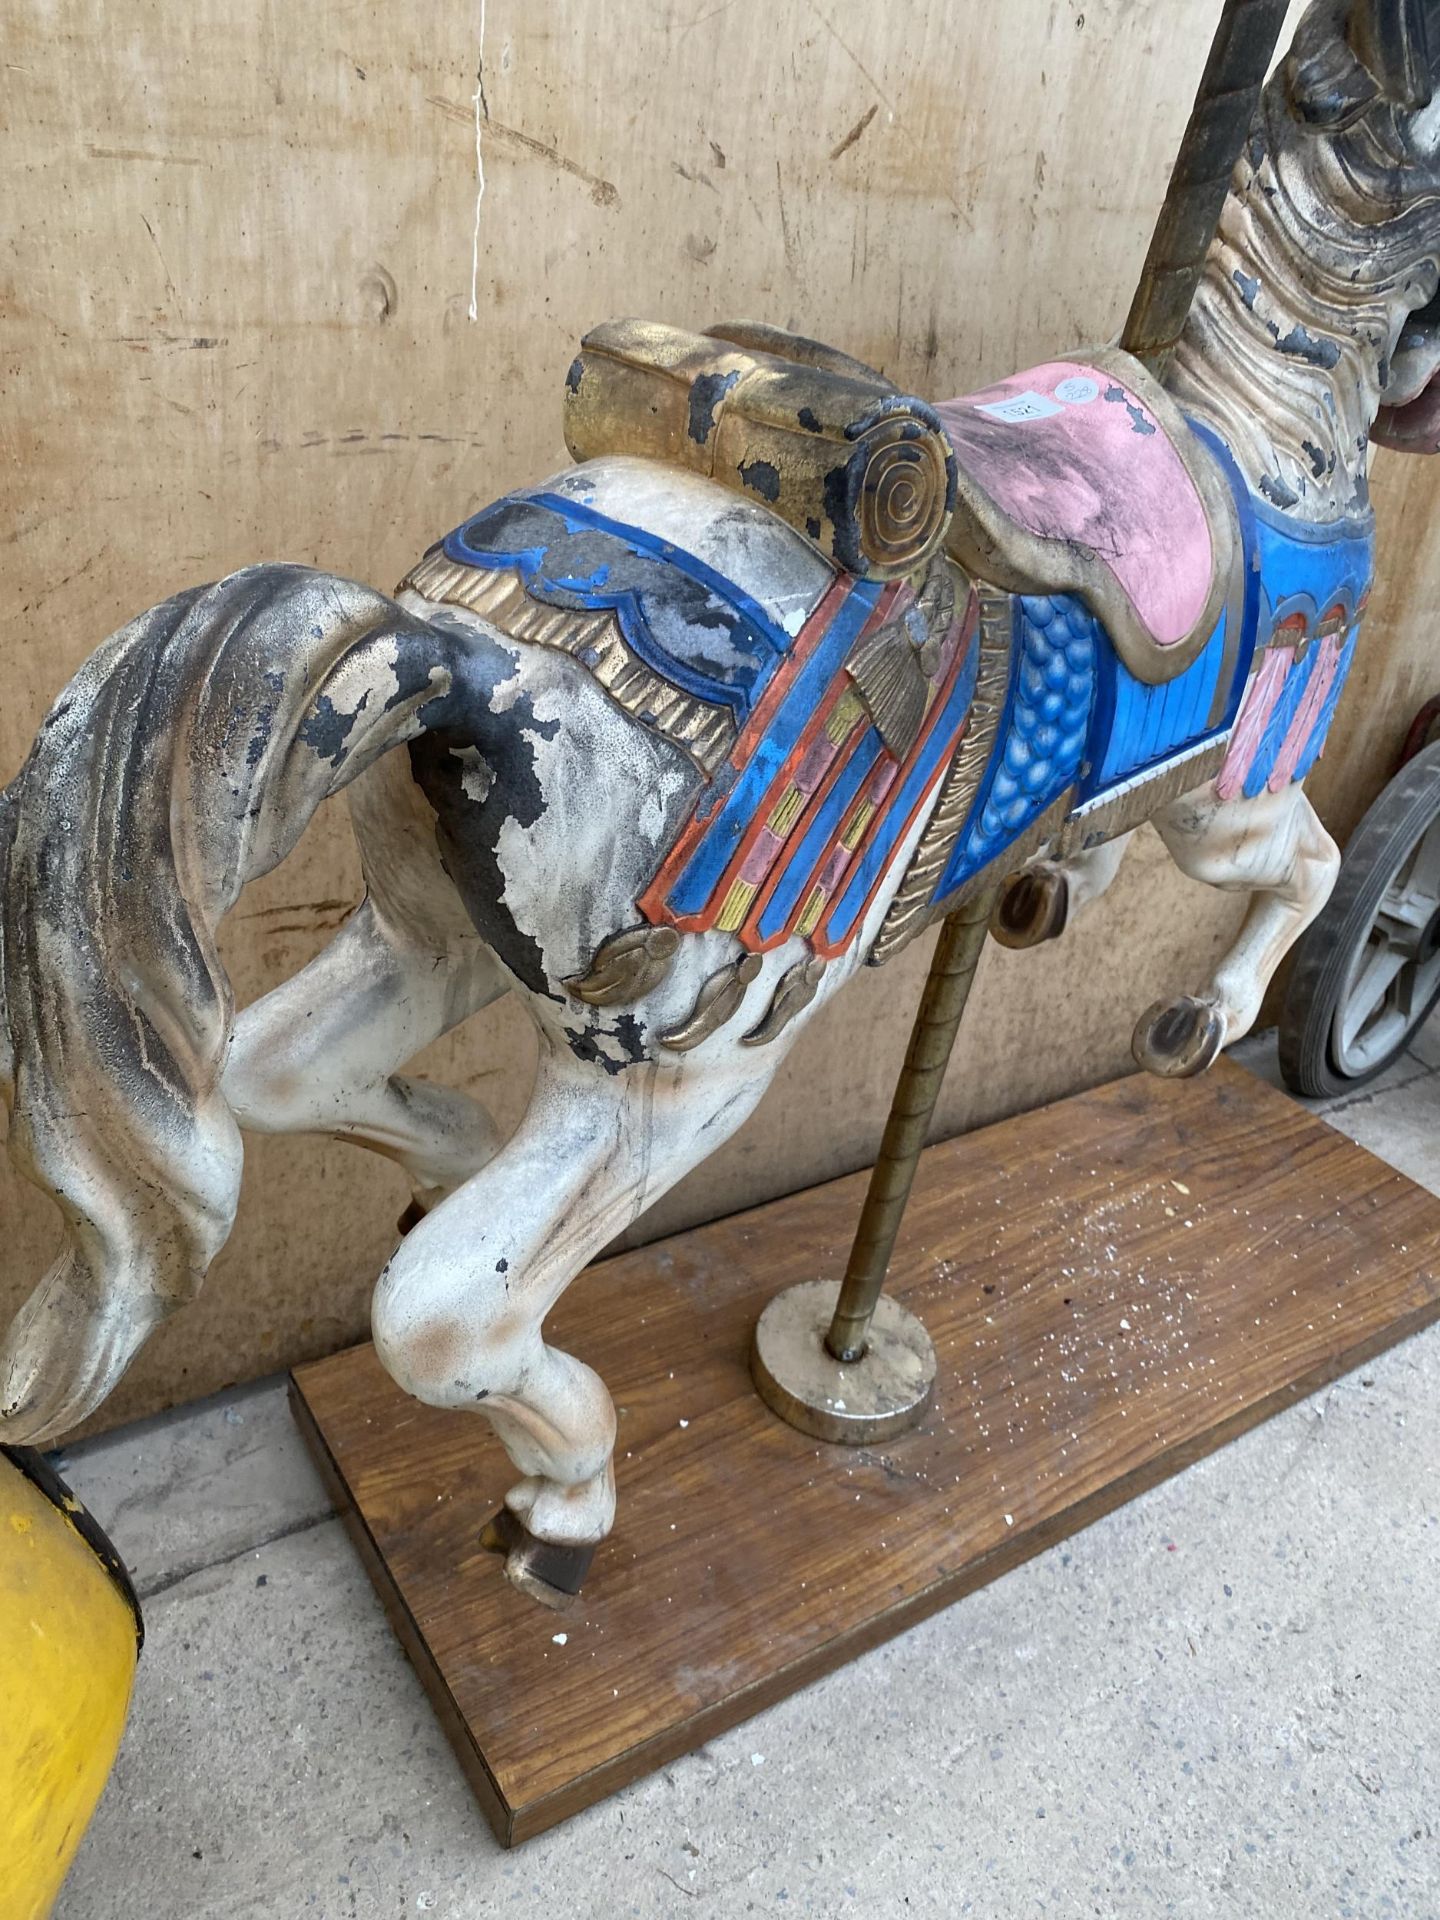 A VINTAGE CAROUSEL HORSE FAIRGROUND RIDE MOUNTED ON A WOODEN PLINTH - Image 4 of 6